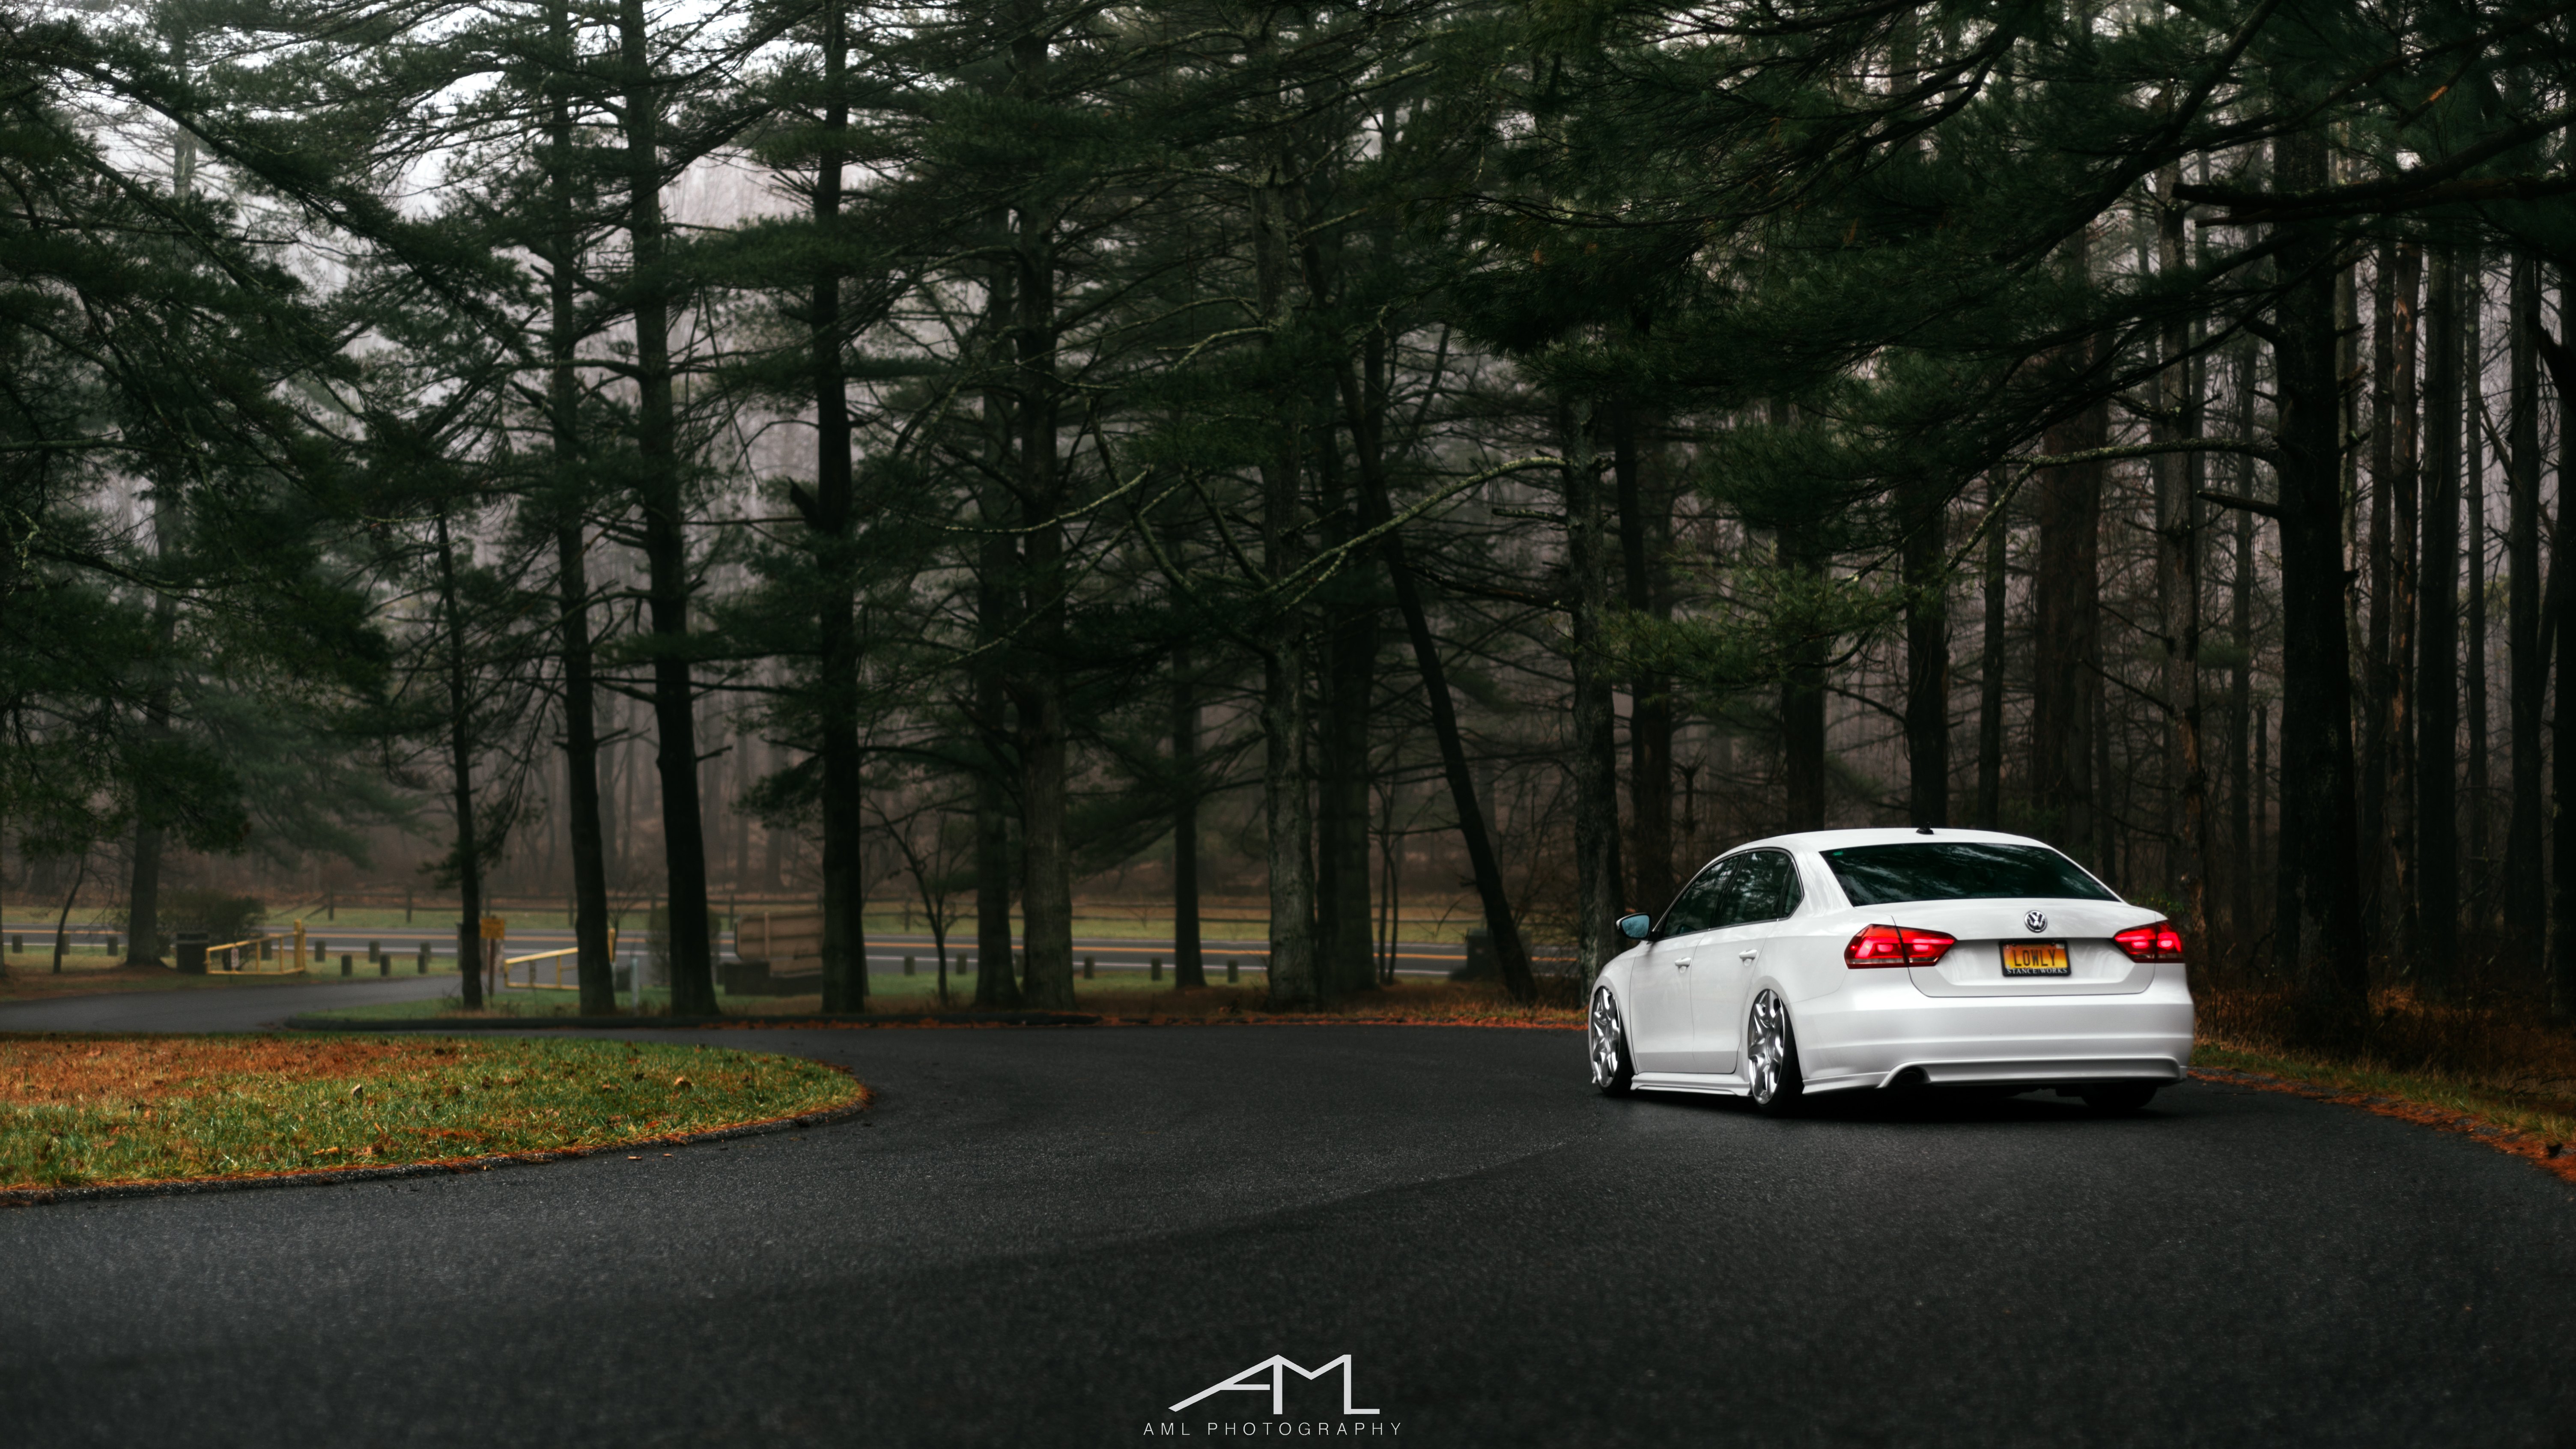 Aftermarket Side Skirts on White Lowered VW Passat - Photo by Arlen Liverman